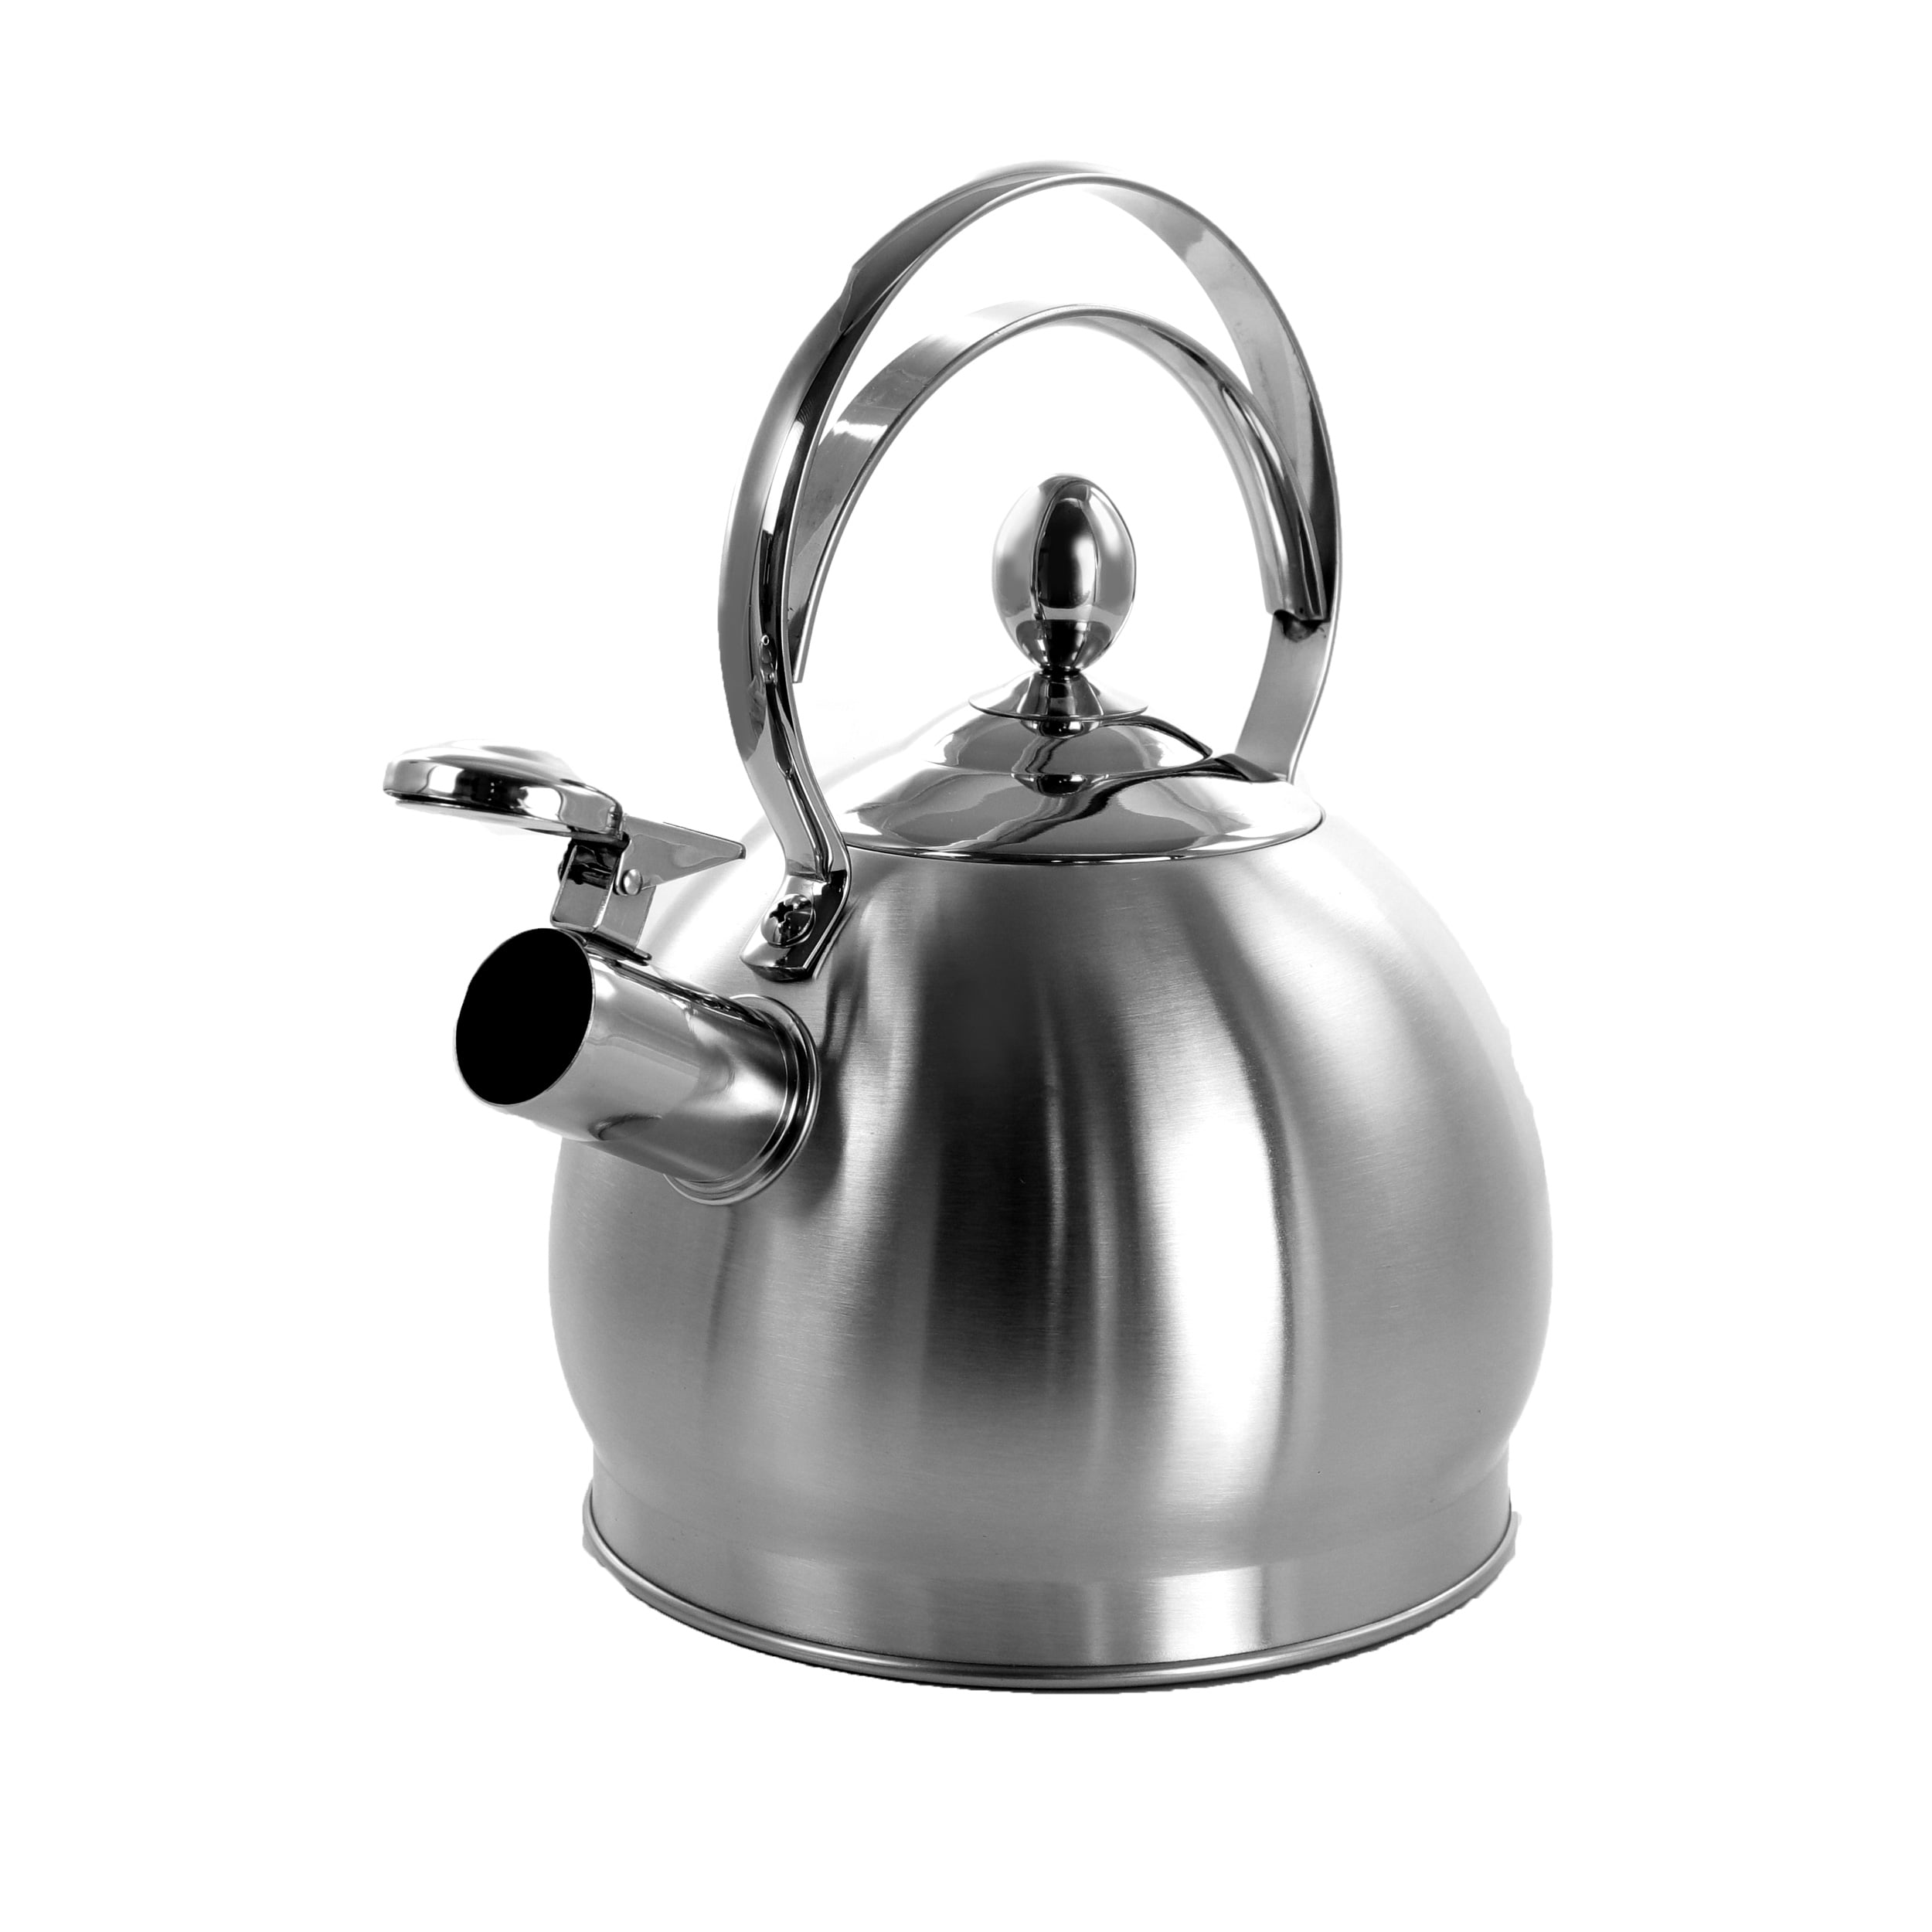 MegaChef 3 Liter Stovetop Whistling Kettle in Red - 9844605